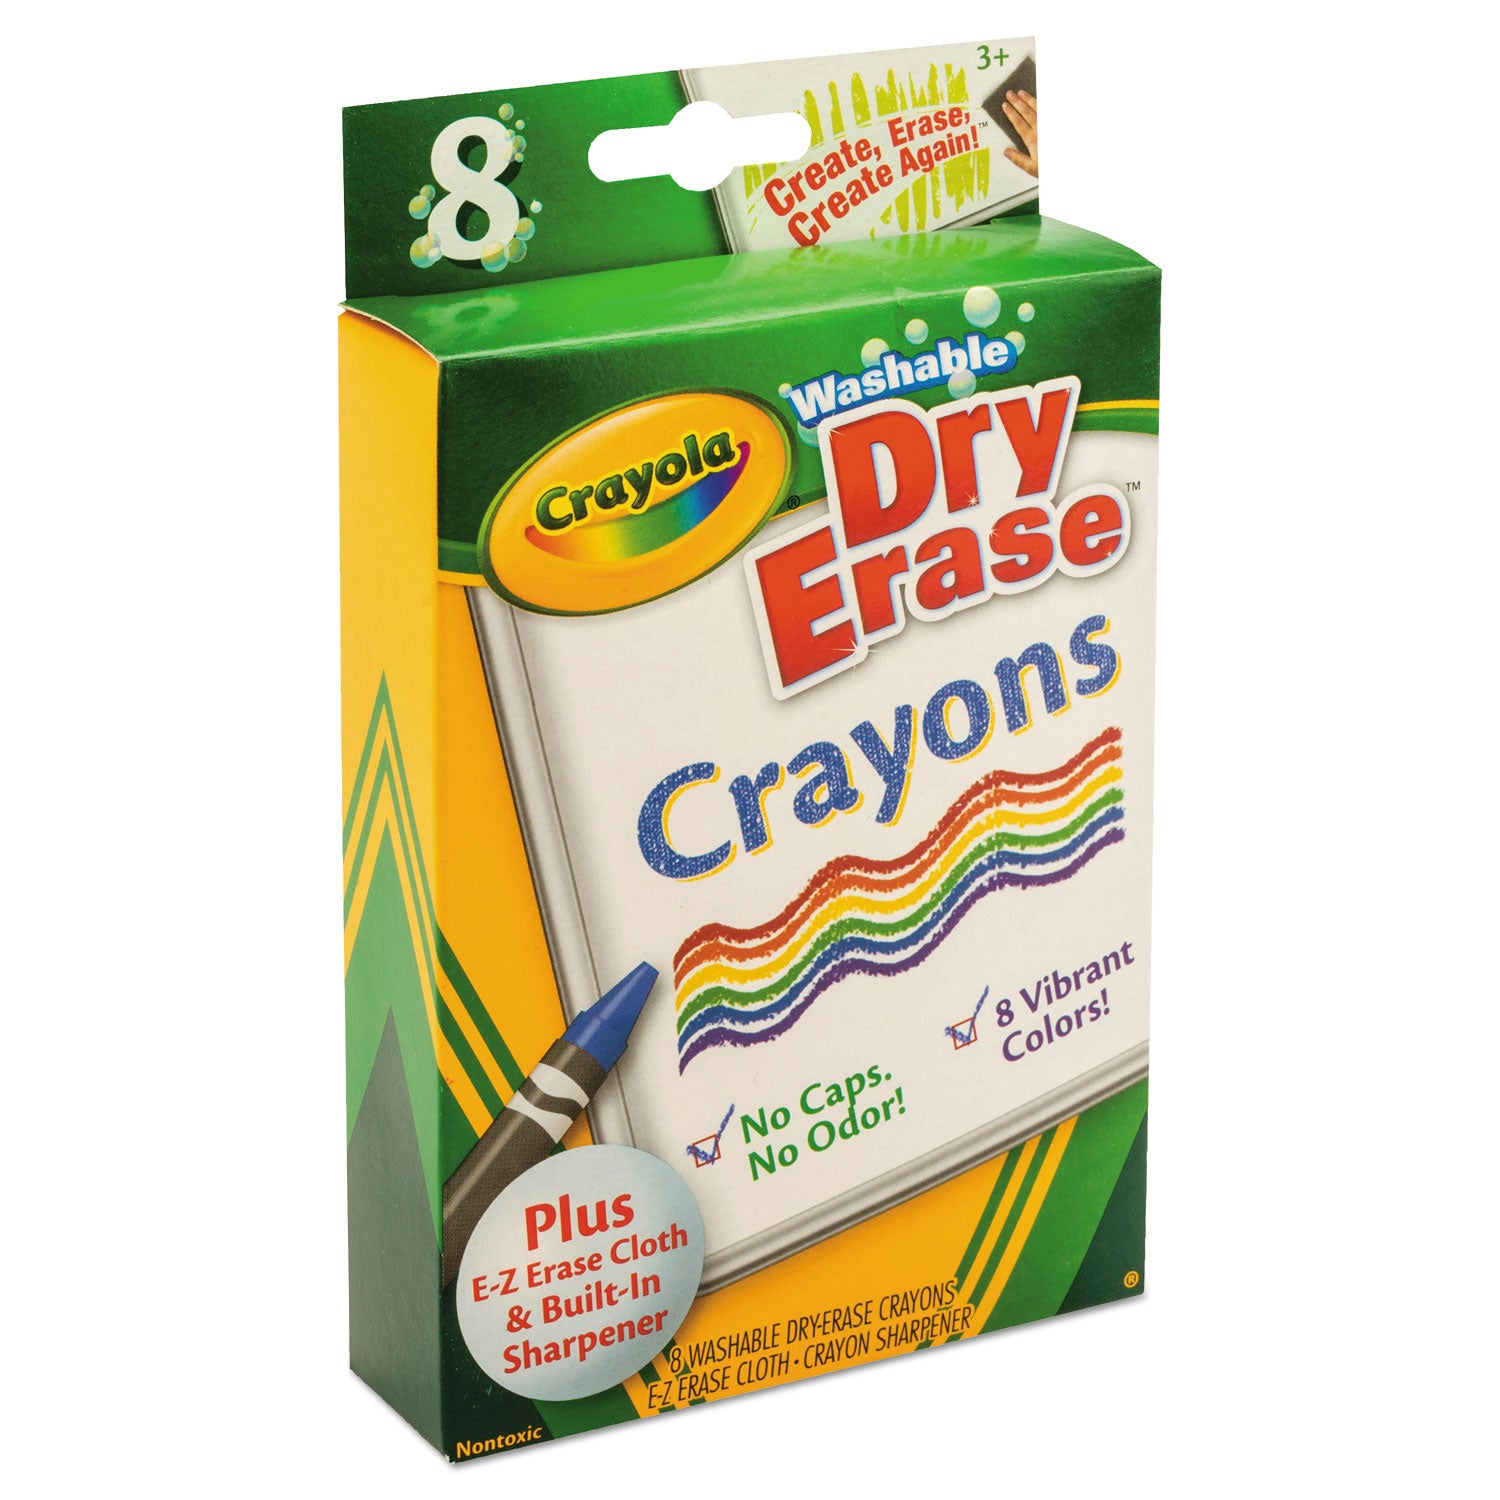 Washable Dry Erase Crayons w/E-Z Erase Cloth, Assorted Colors, 8/Pack - 